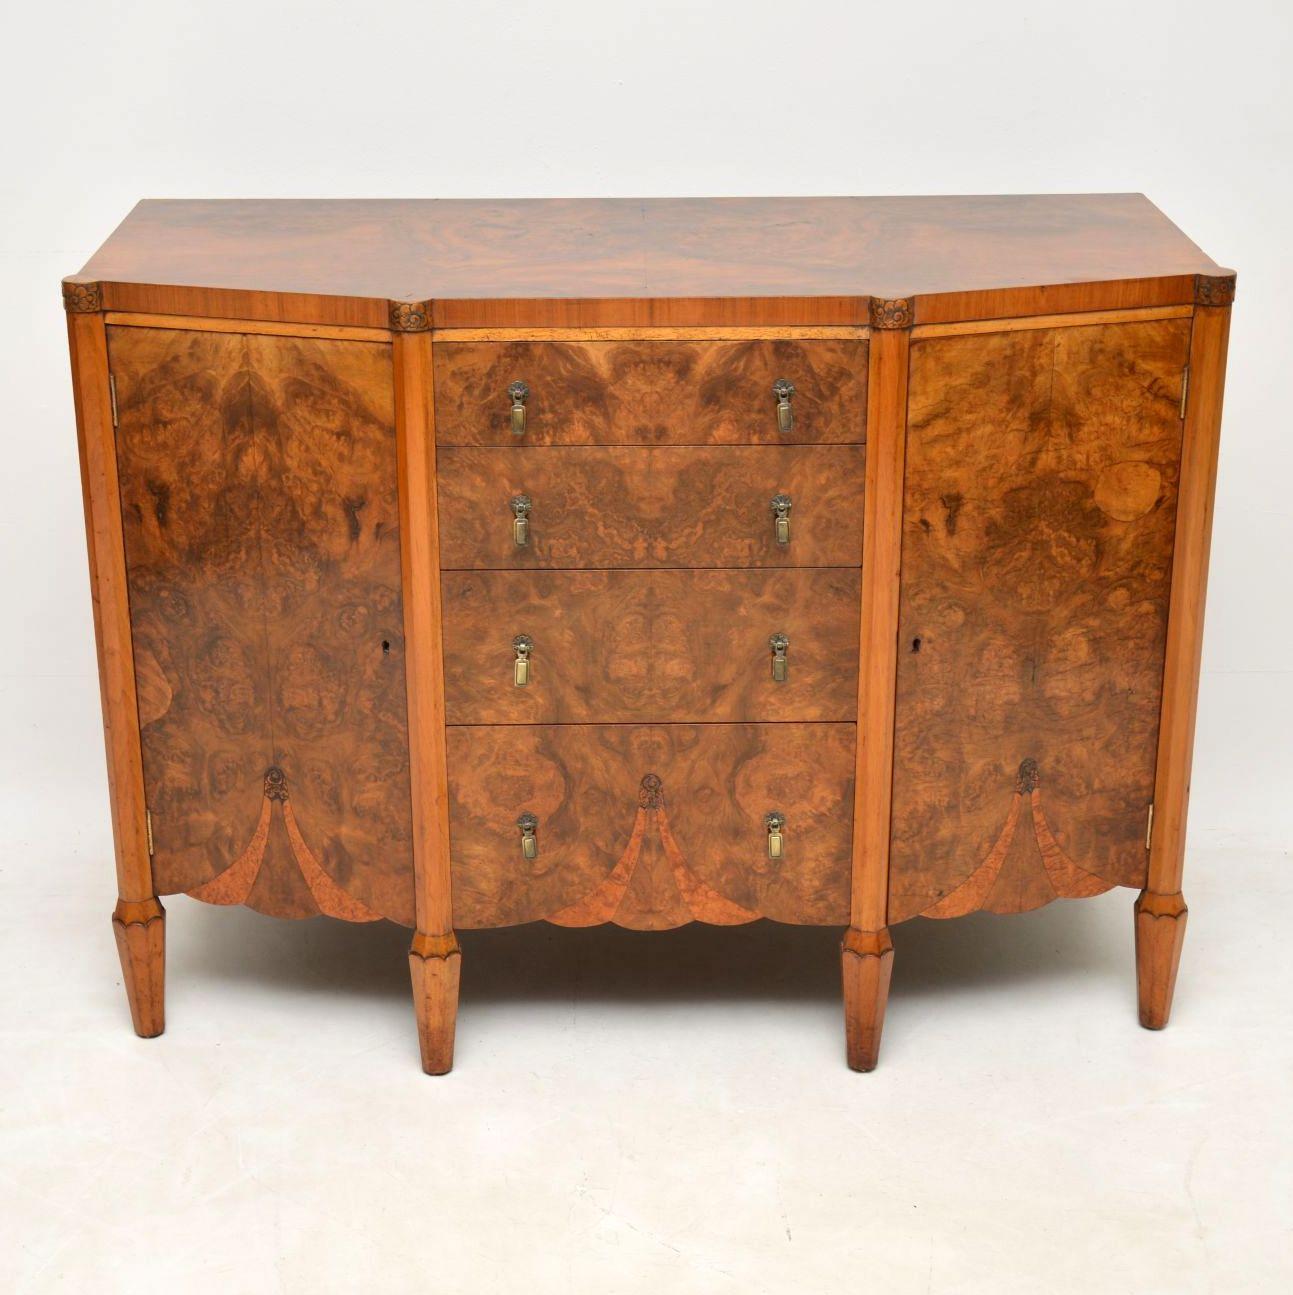 Original Art Deco burr walnut sideboard with a beautiful pattern within the veneers & of high quality. It’s in excellent condition, very stylish & a good solid practicable piece of furniture. It’s also small & compact, with plenty of storage in the